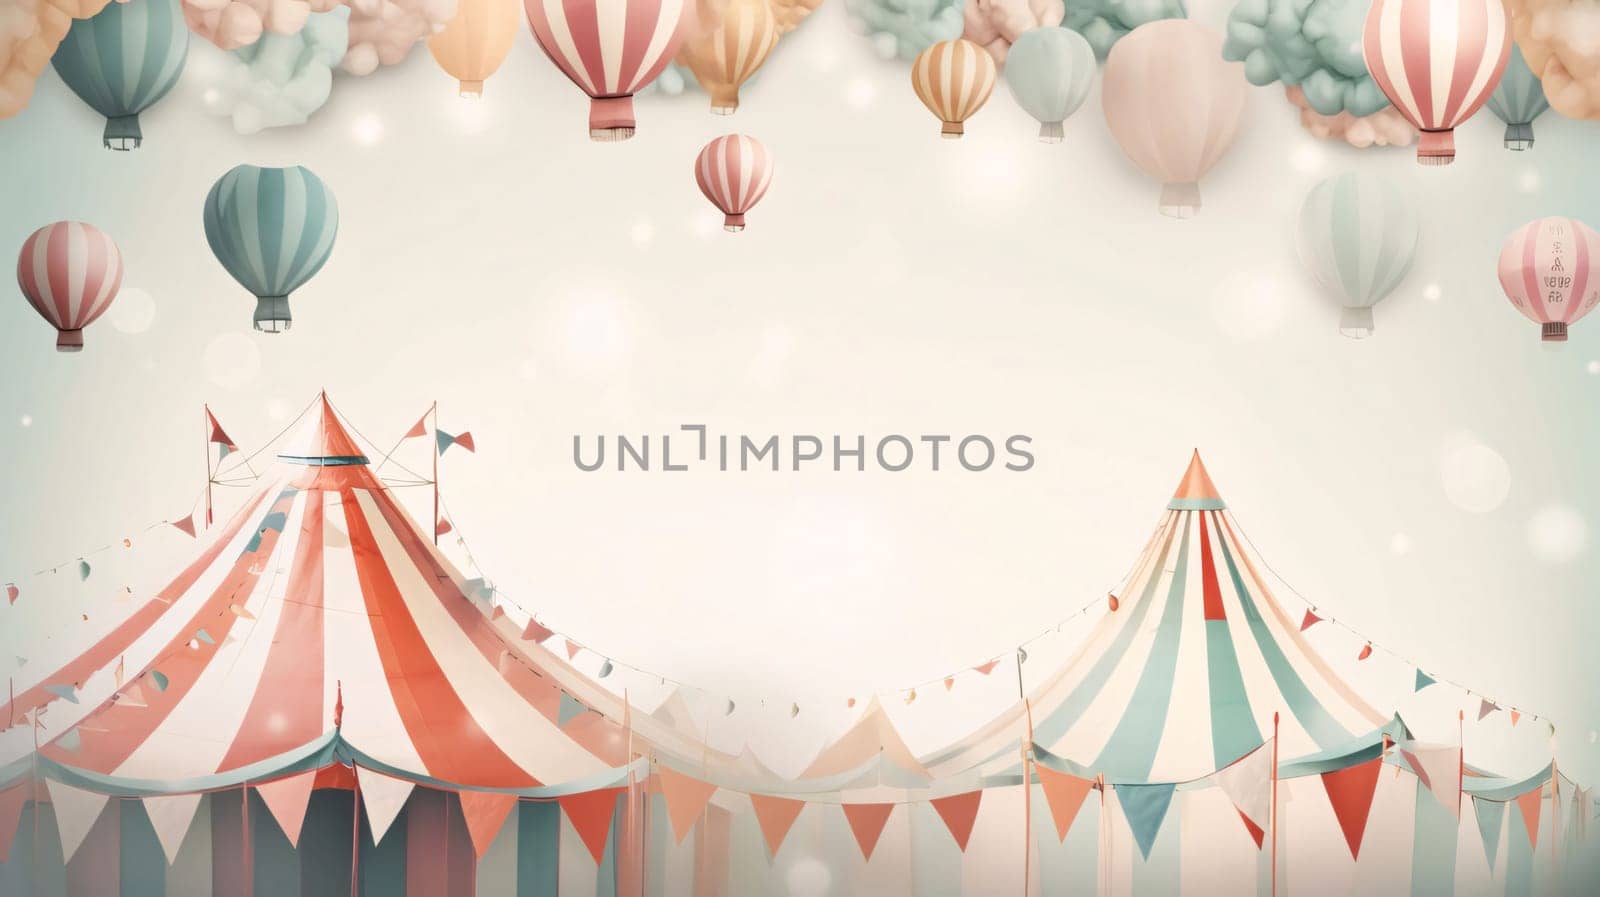 Banner: Carnival background with air balloons and circus tent. Vector illustration.